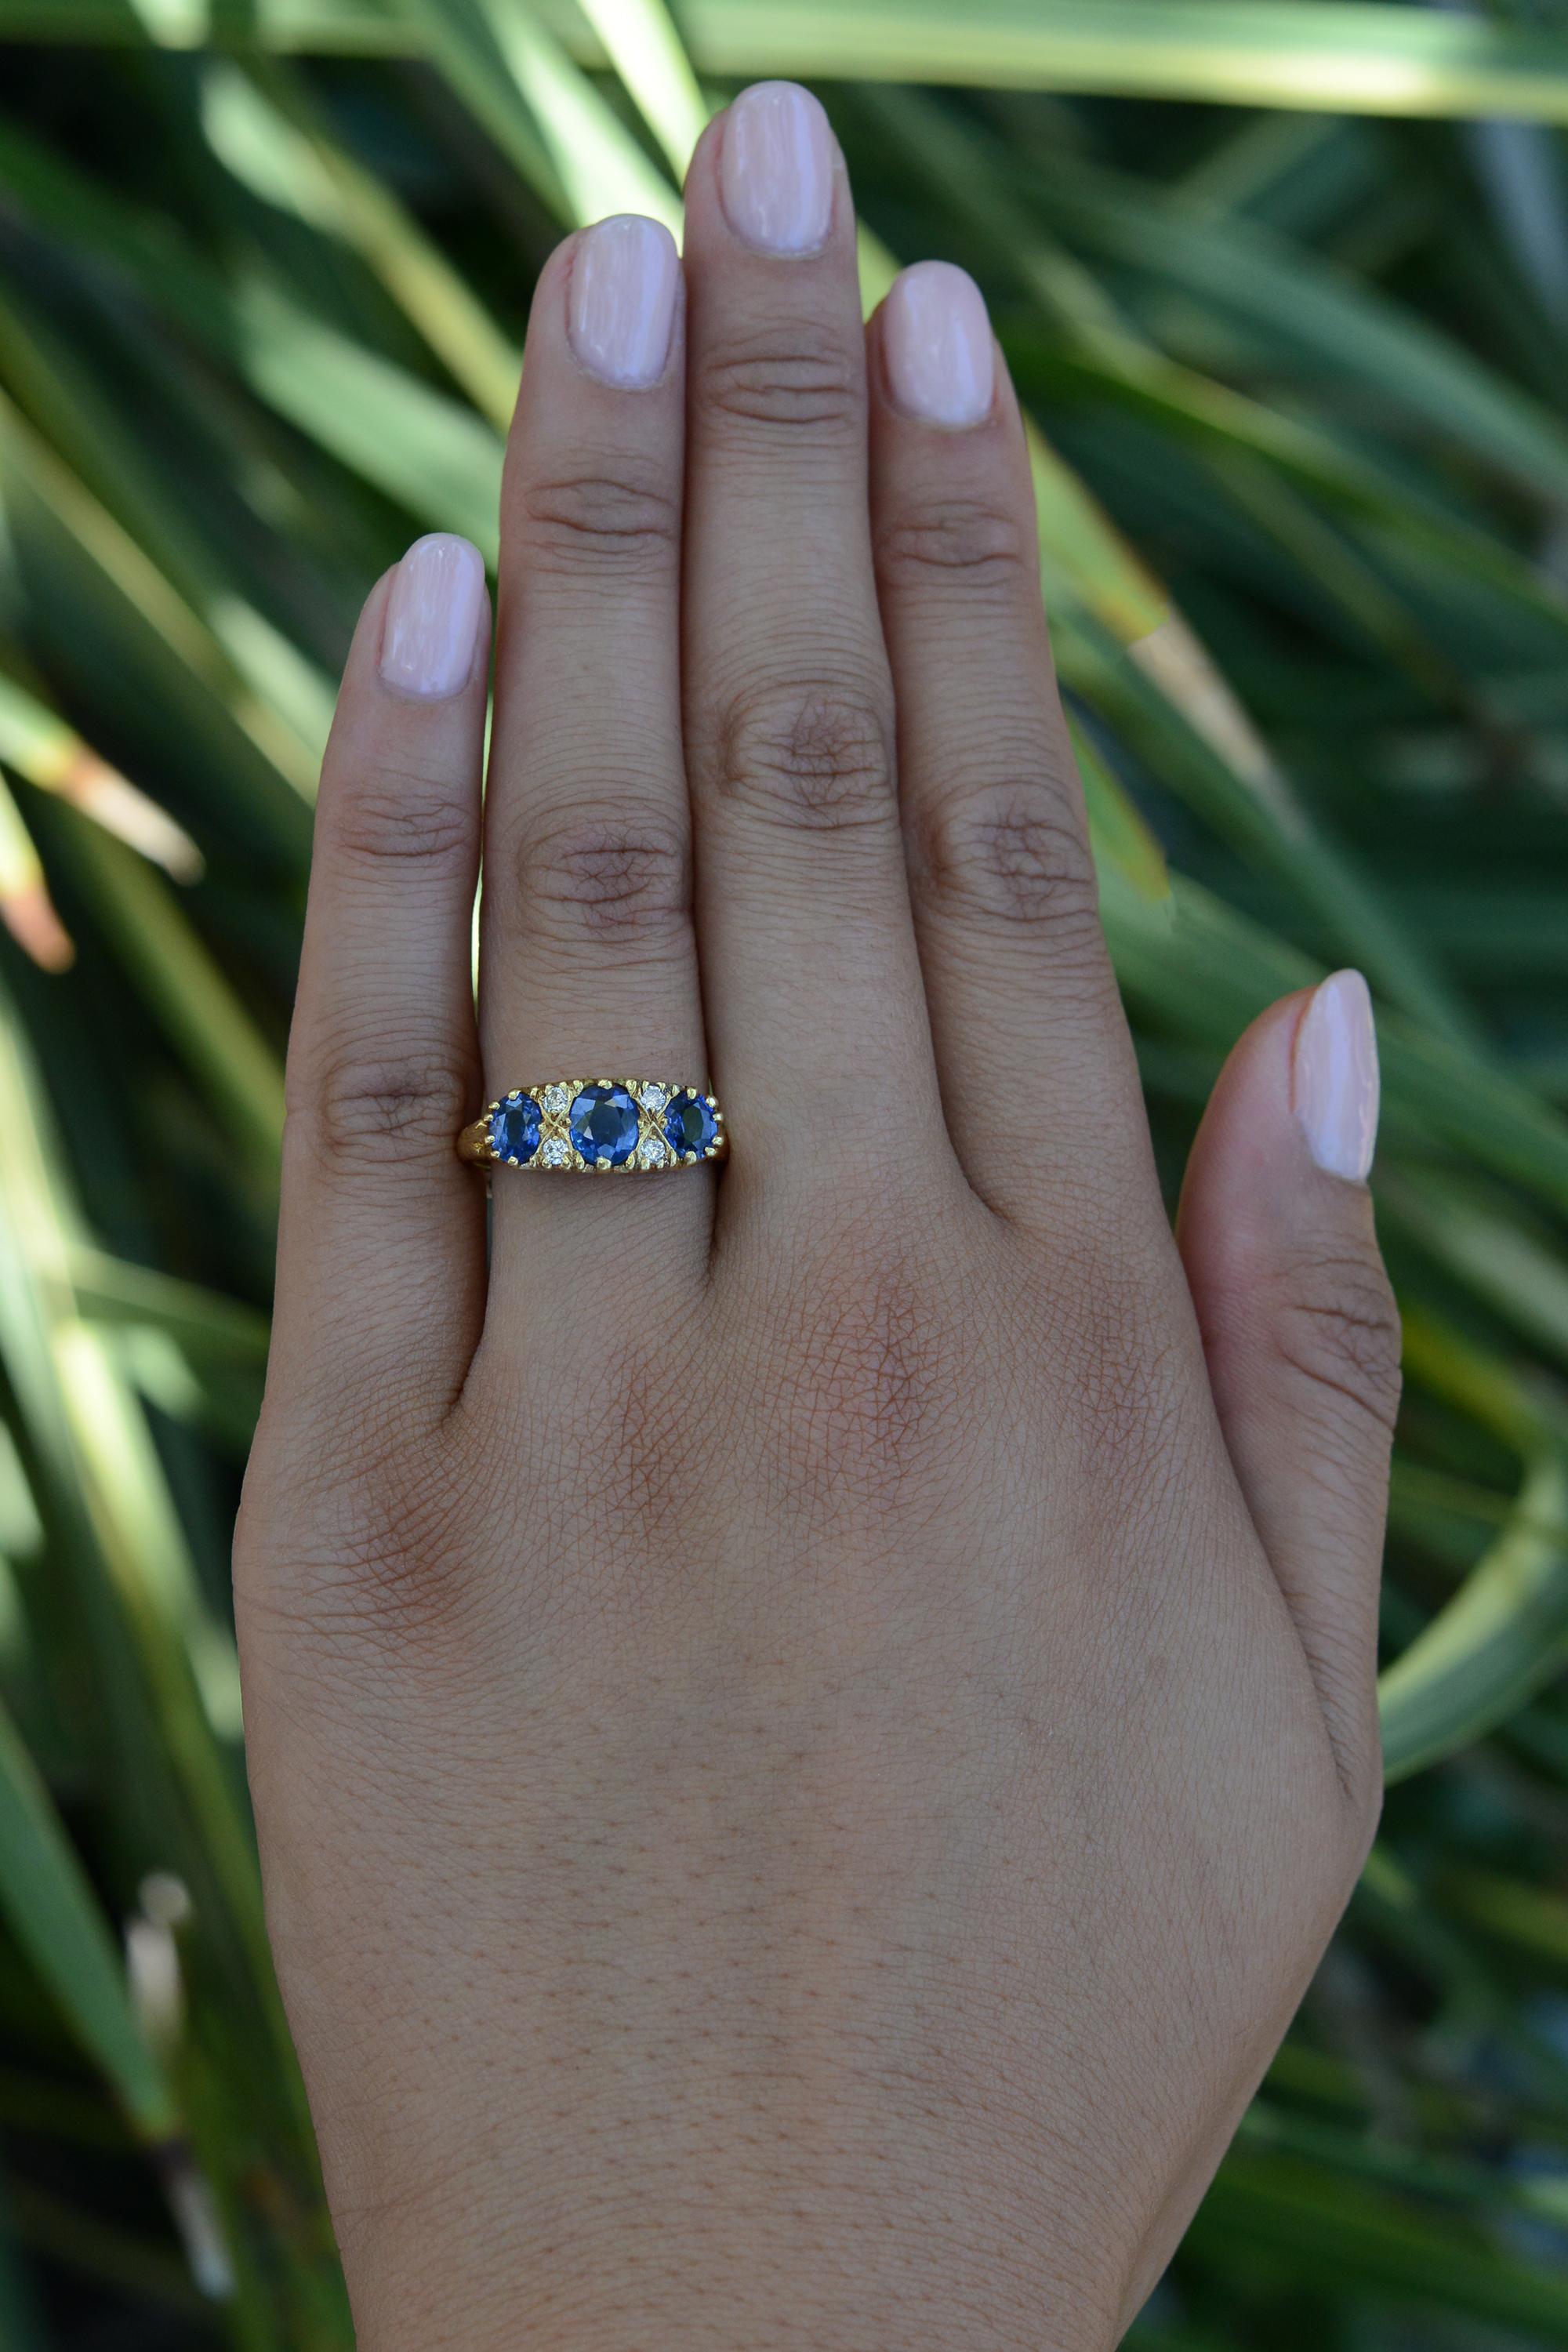 Adorn your finger with this fabulous vintage Victorian English 3 stone sapphire engagement ring. Crafted from 18 karat yellow gold, the trilogy of vivid royal blue sapphires are nested between 4 sparkling diamonds amongst a scroll work gallery.